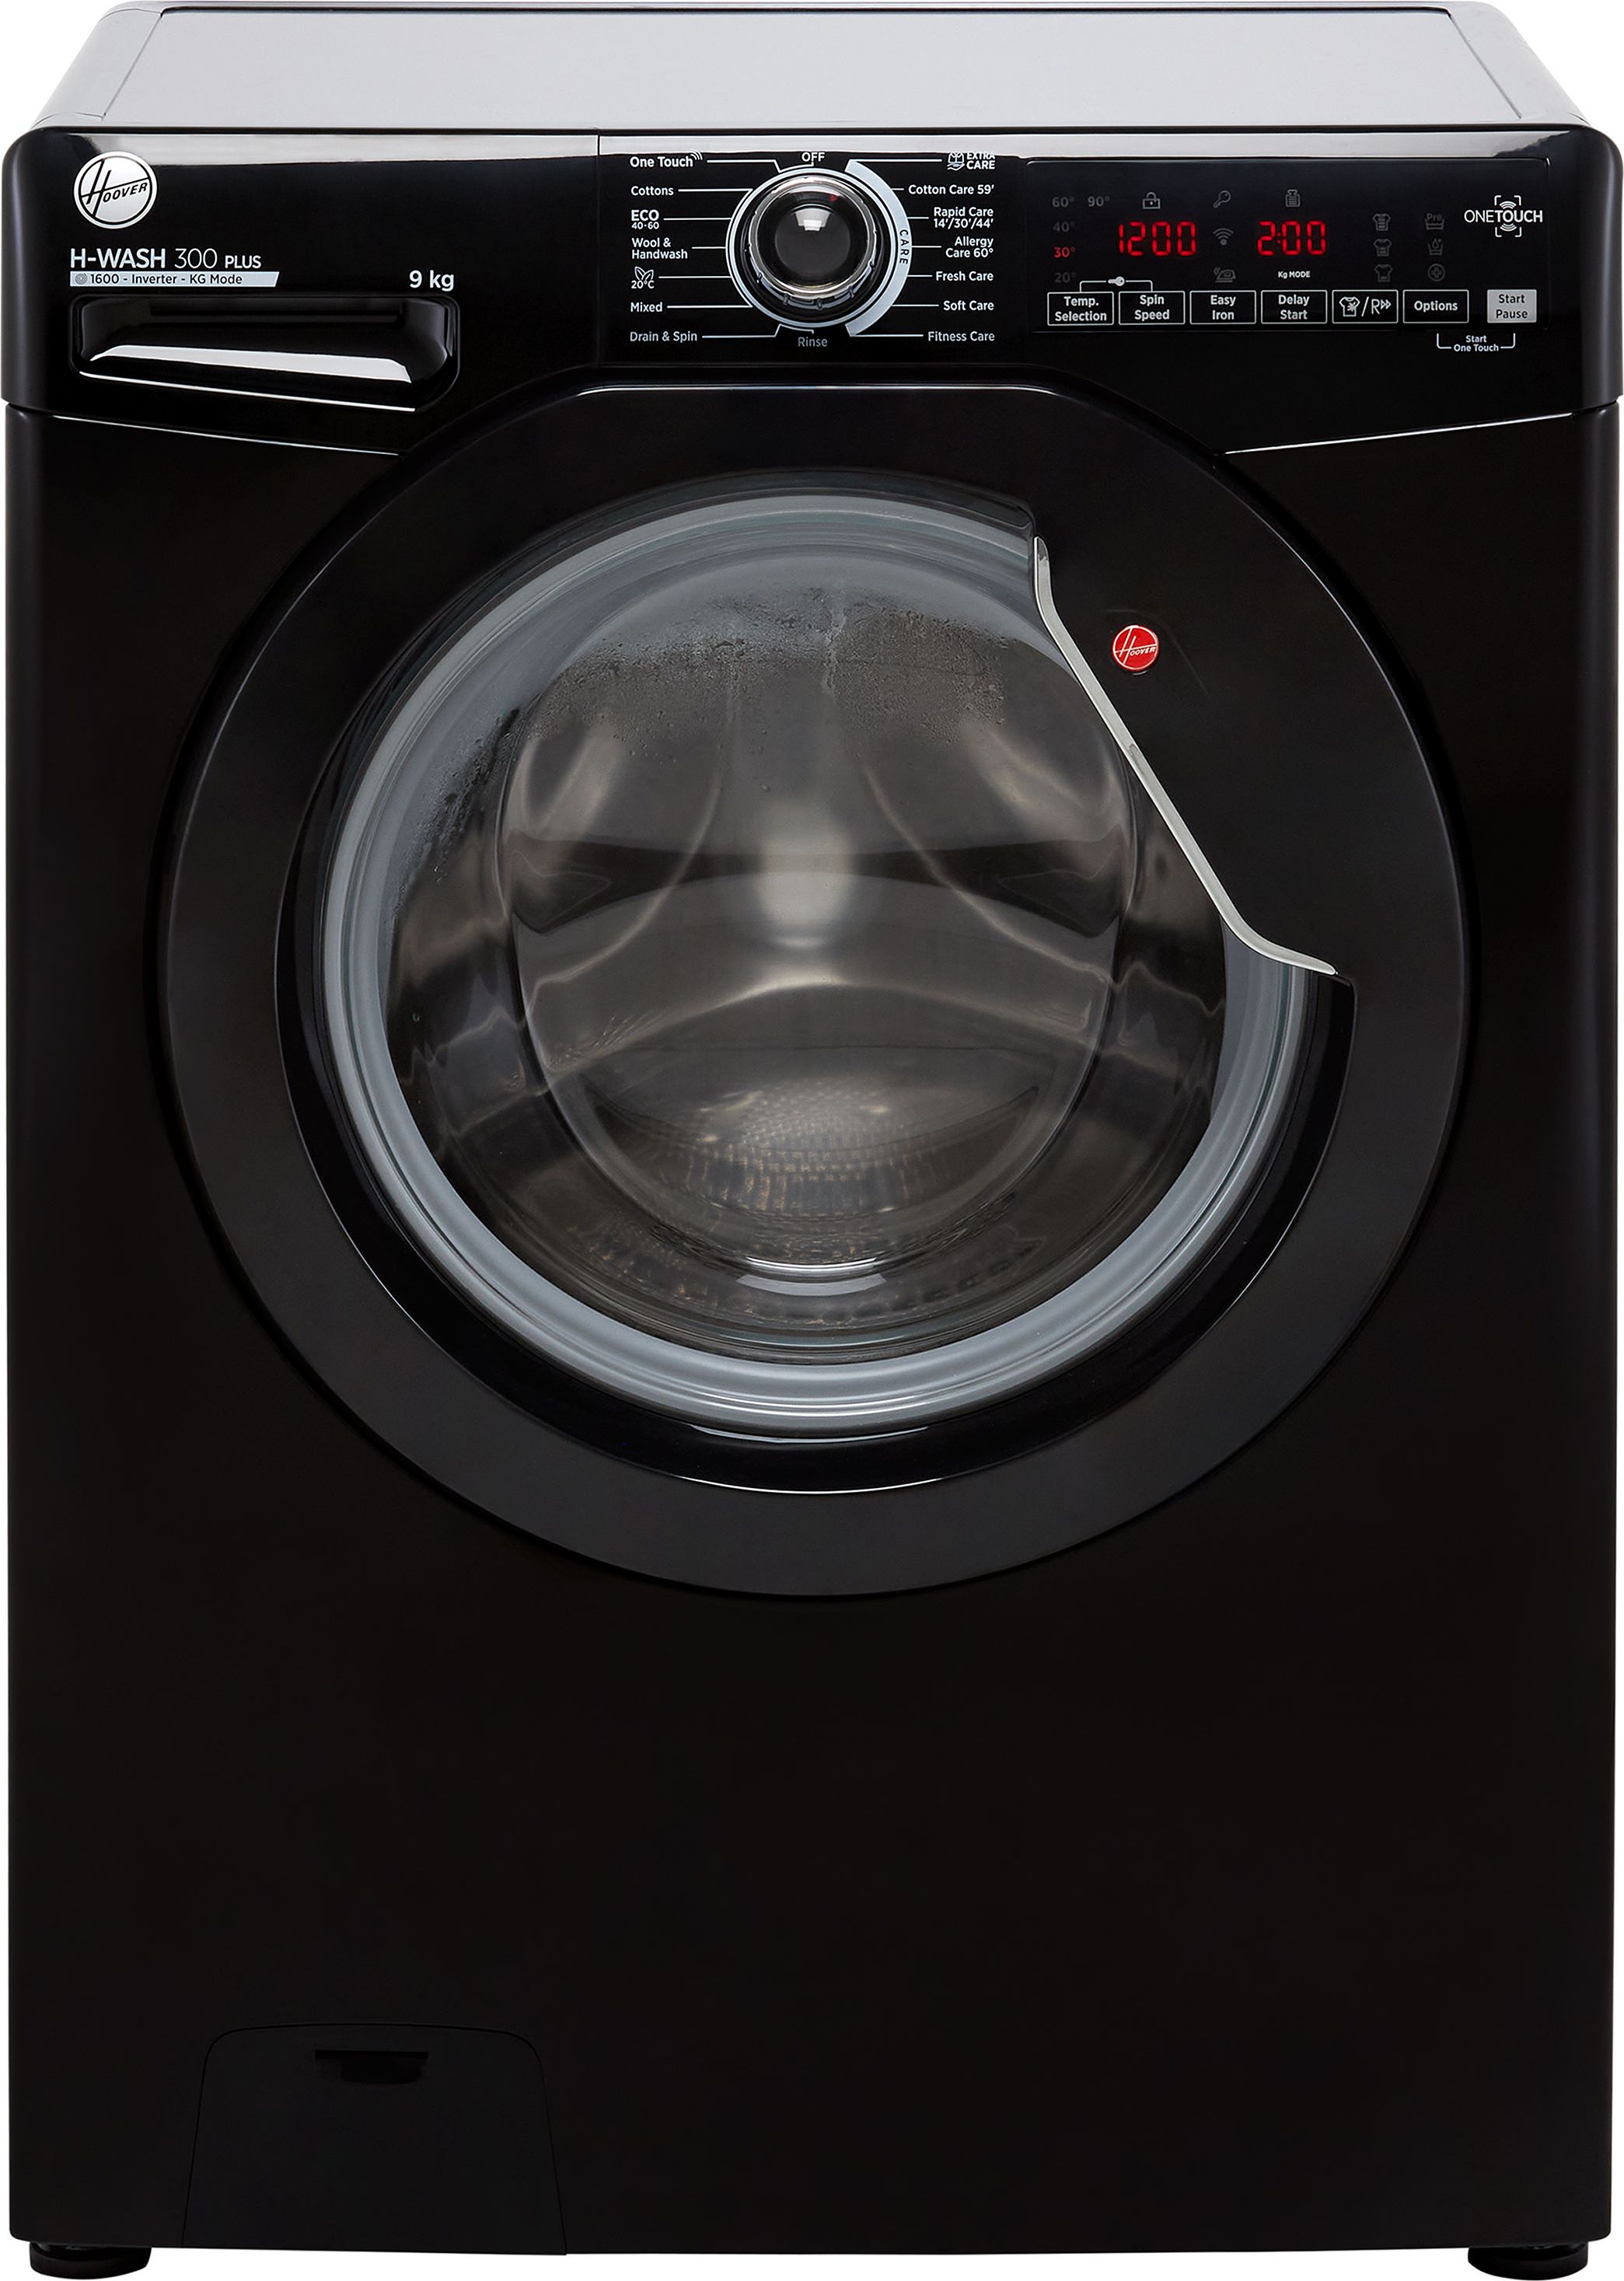 Hoover H-WASH 300 H3W69TMBBE/1 9kg Washing Machine with 1600 rpm - Black - B Rated, Black